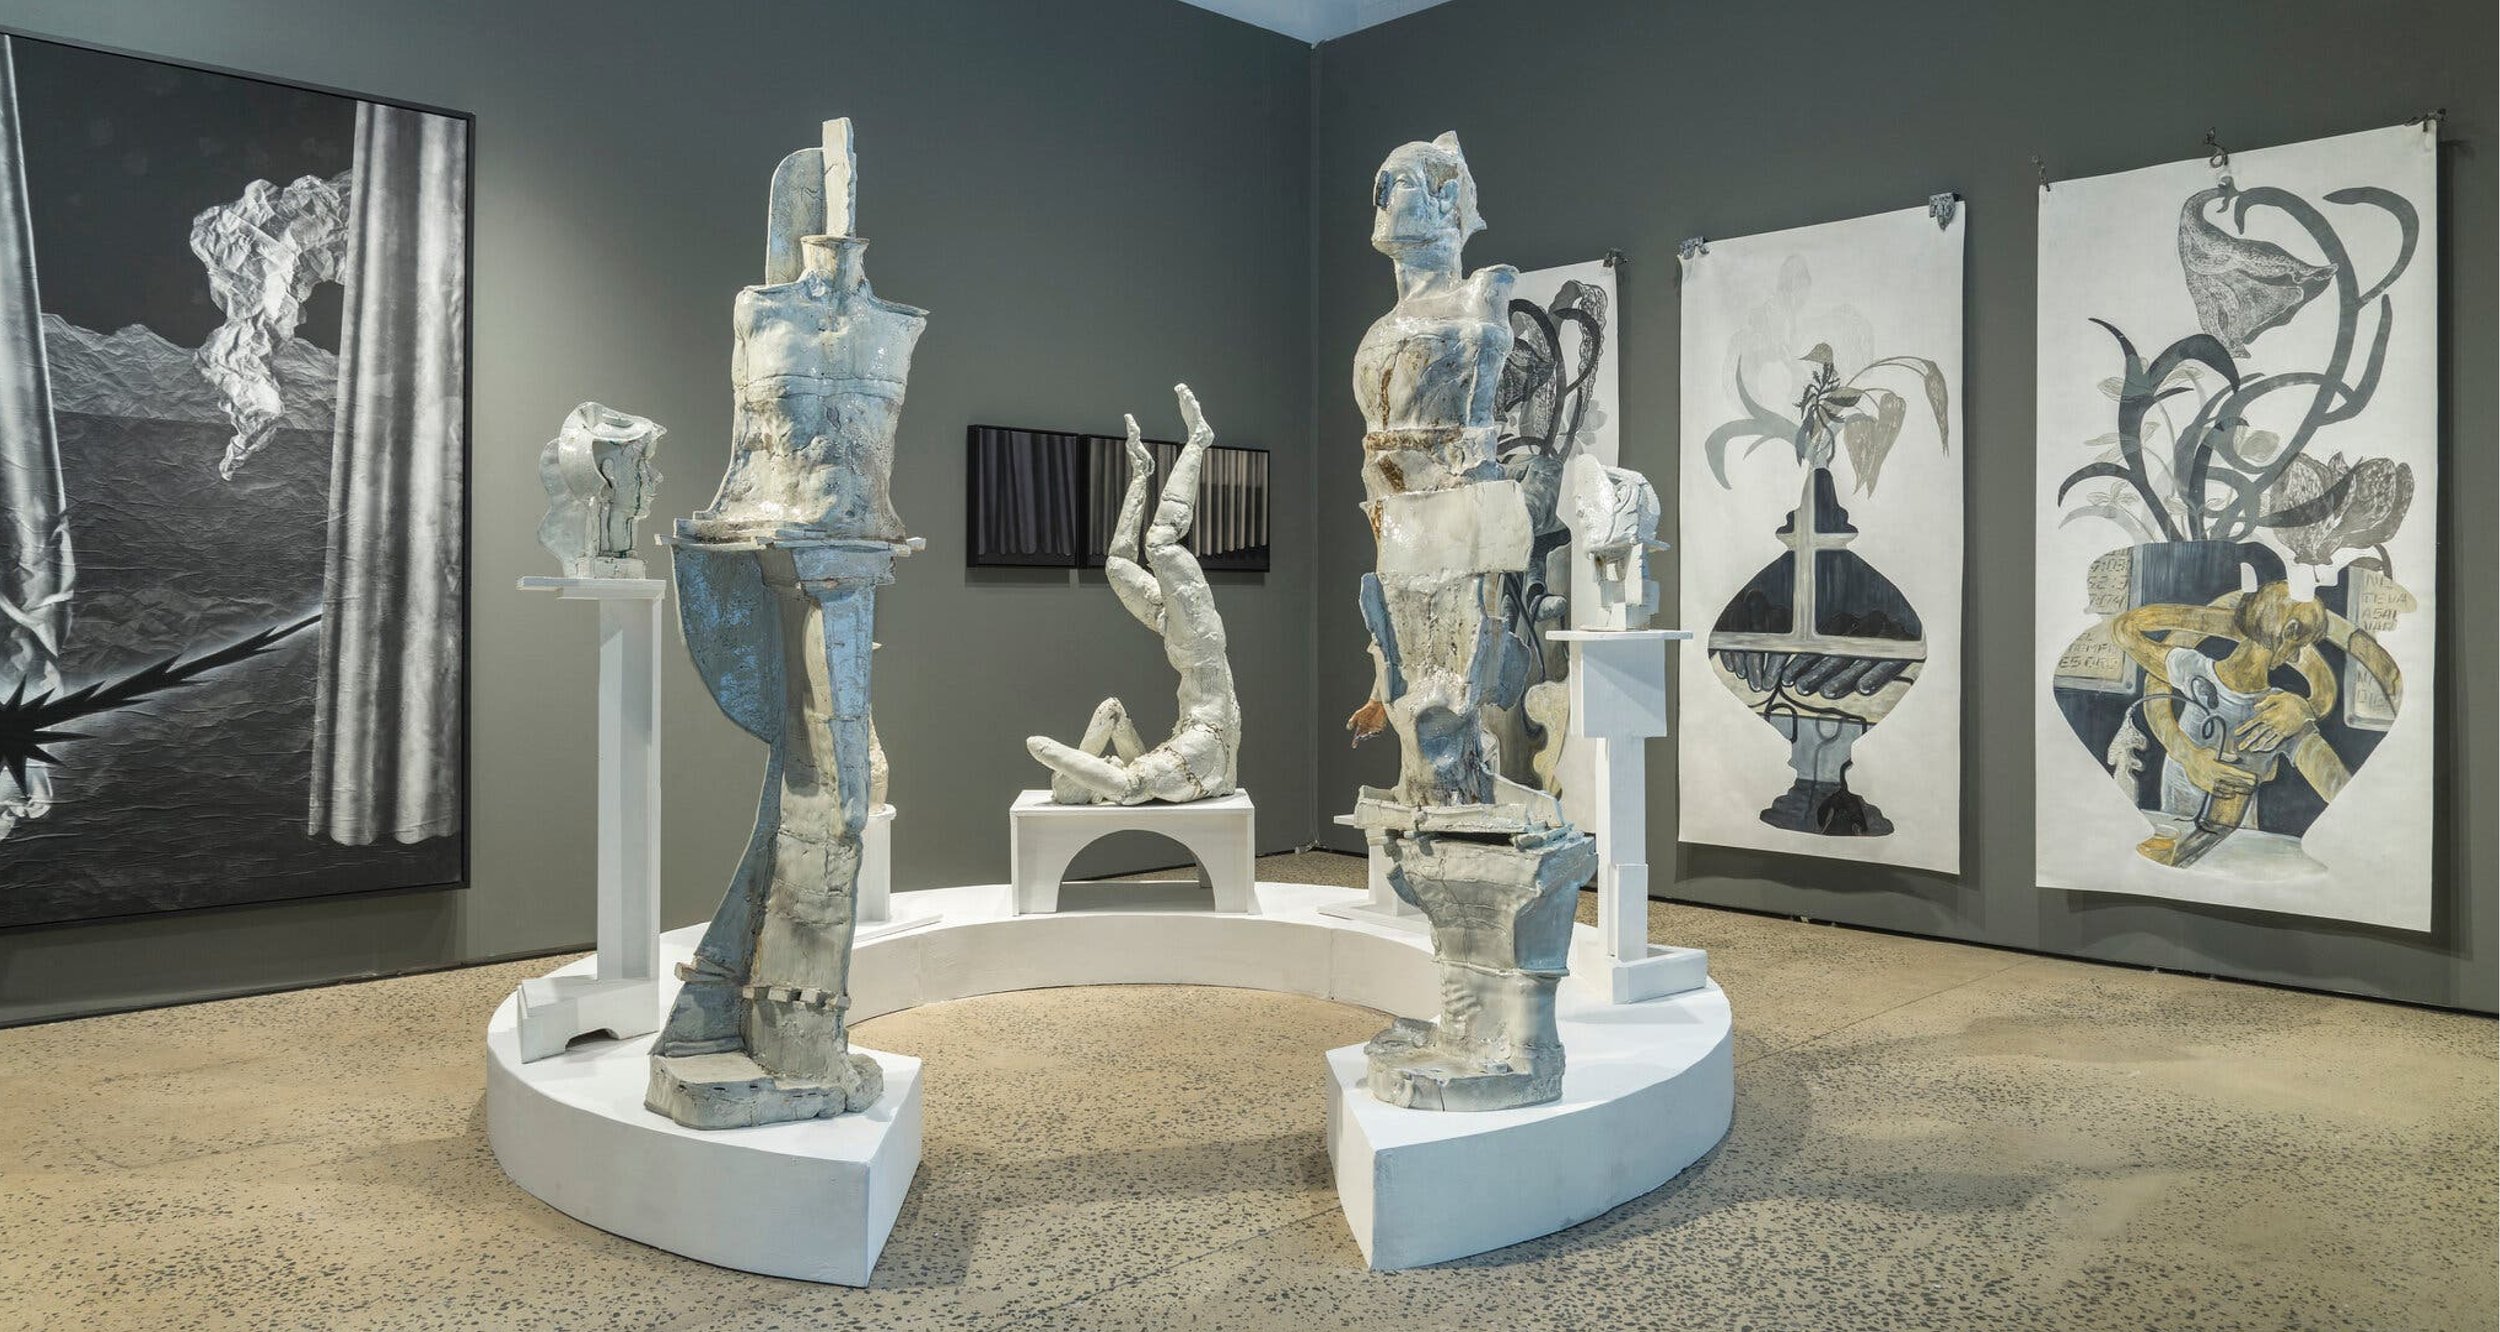  Installation view of Trotter &amp; Sholer and Swivel Gallery exhibition room. Porcelain sculptures are by Derek Weisberg, foreground. At left, curtain collage by Pajtim Osmanaj; right, oil pastels by Luján Pérez. 